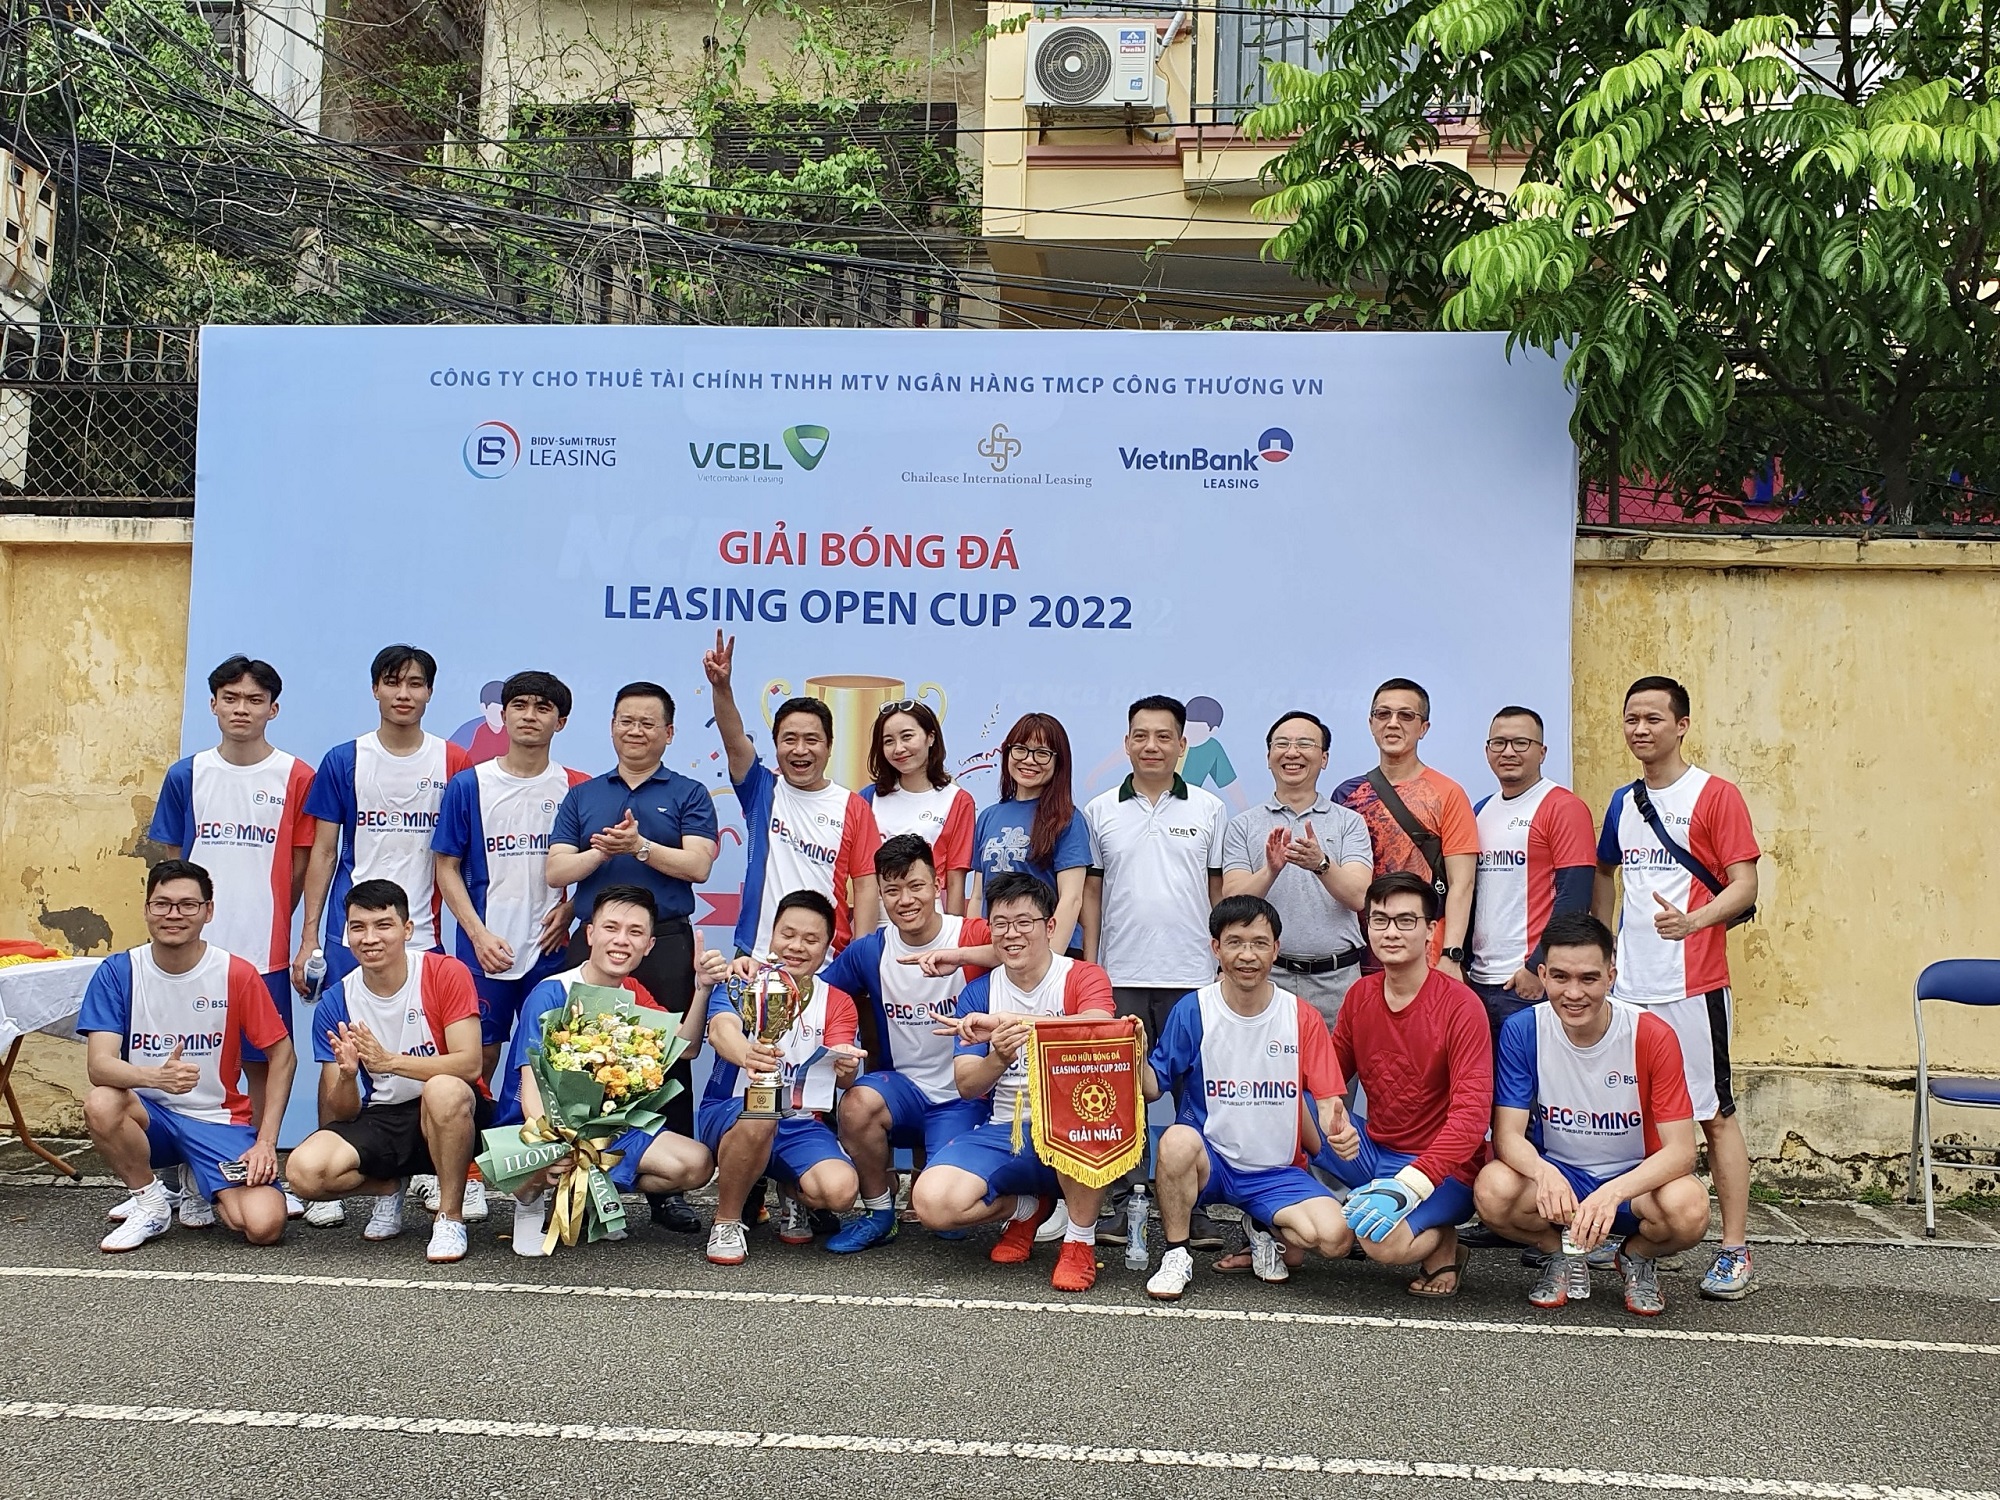 BSL wins the champion cup of Leasing Open Cup 2022 in Hanoi